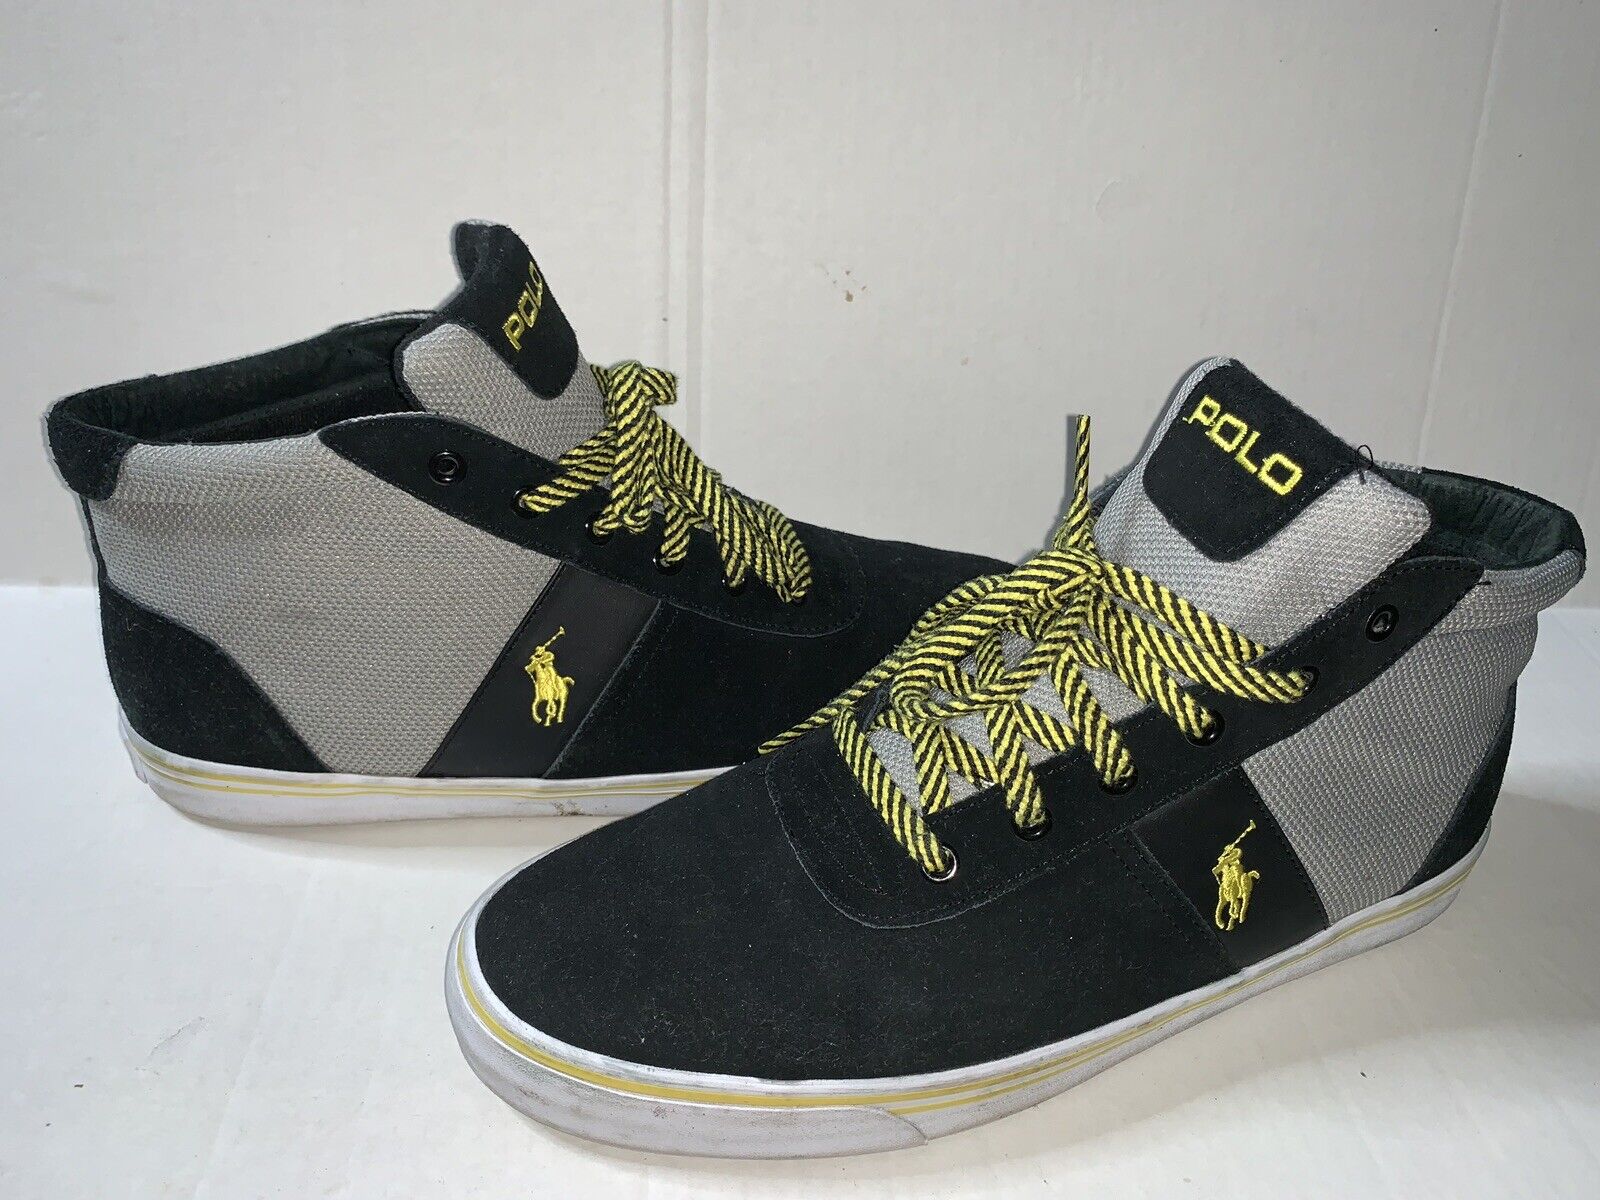 Preowned- High quality new Polo Ralph Lauren Mid-Top Free shipping on posting reviews Size 13 Suede Sneakers Mens